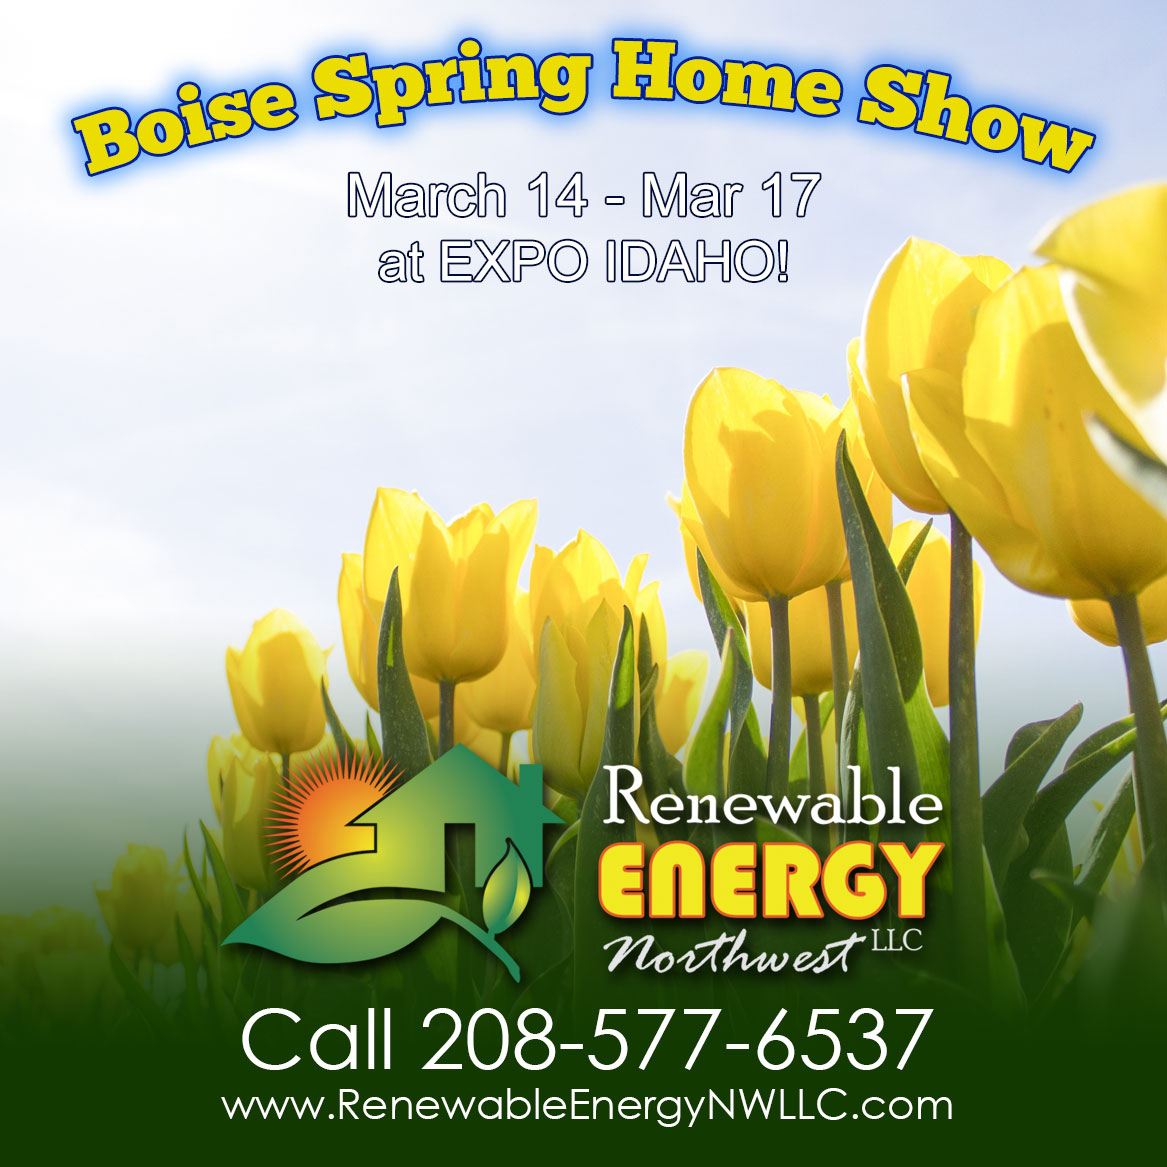 RENW at the Boise Spring Home Show!